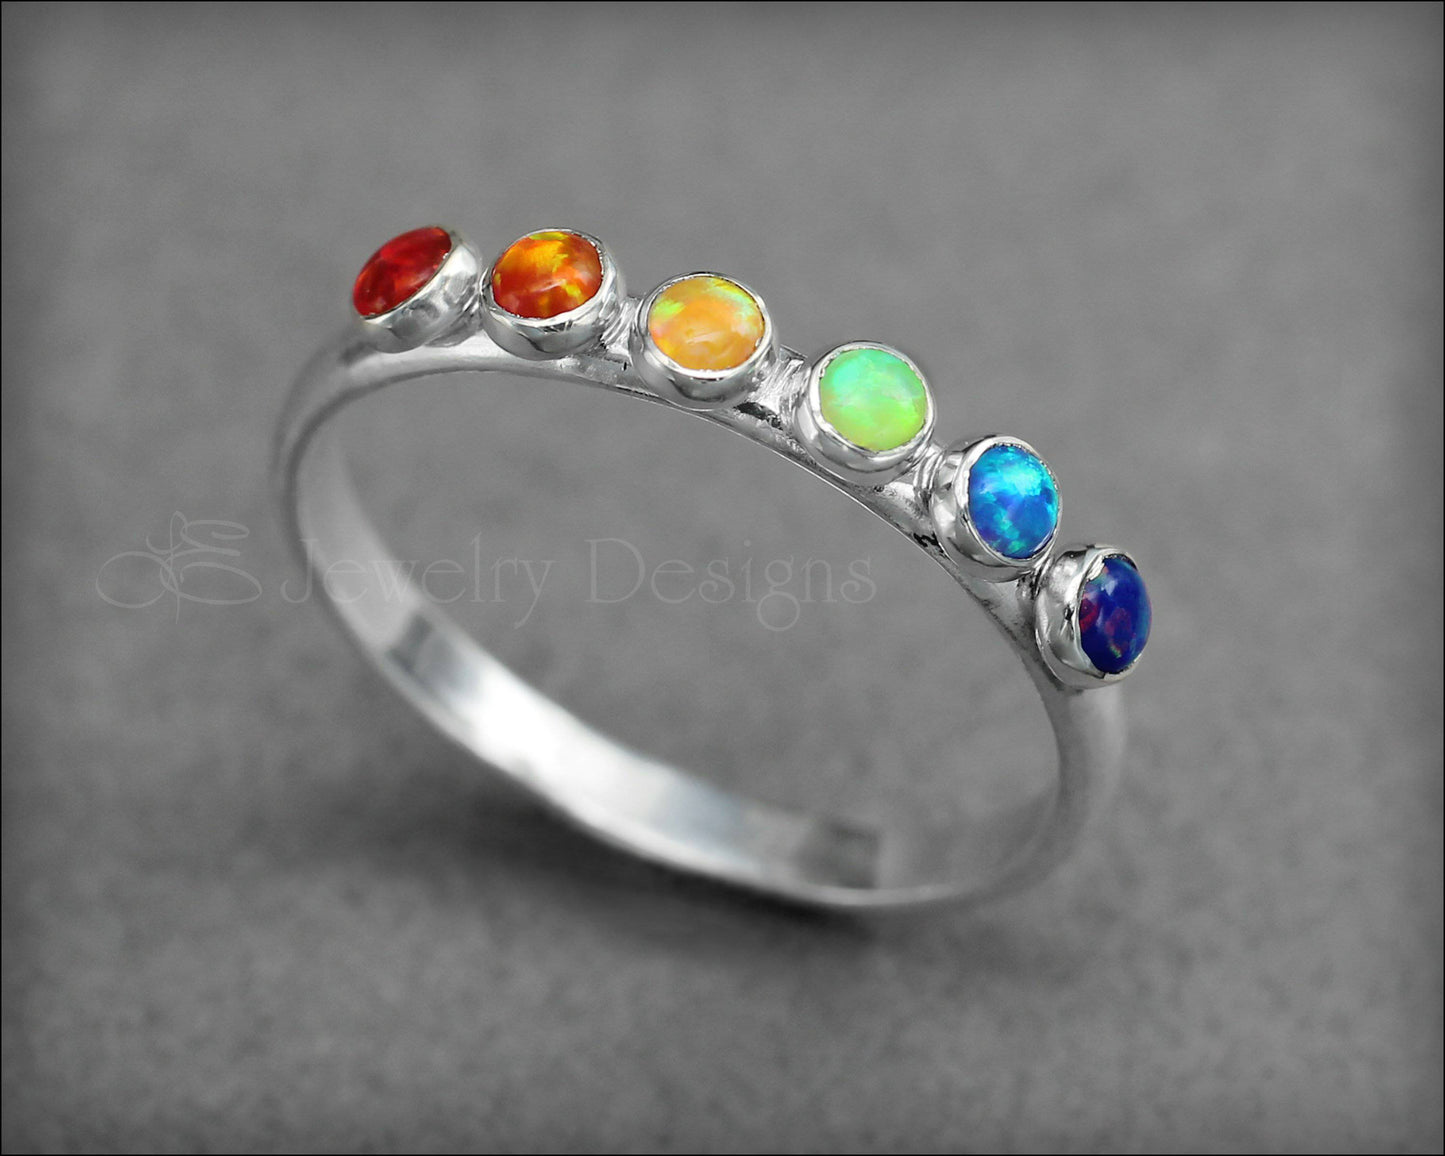 Load image into Gallery viewer, Multi Opal Ring - (choose # of opals) - LE Jewelry Designs
